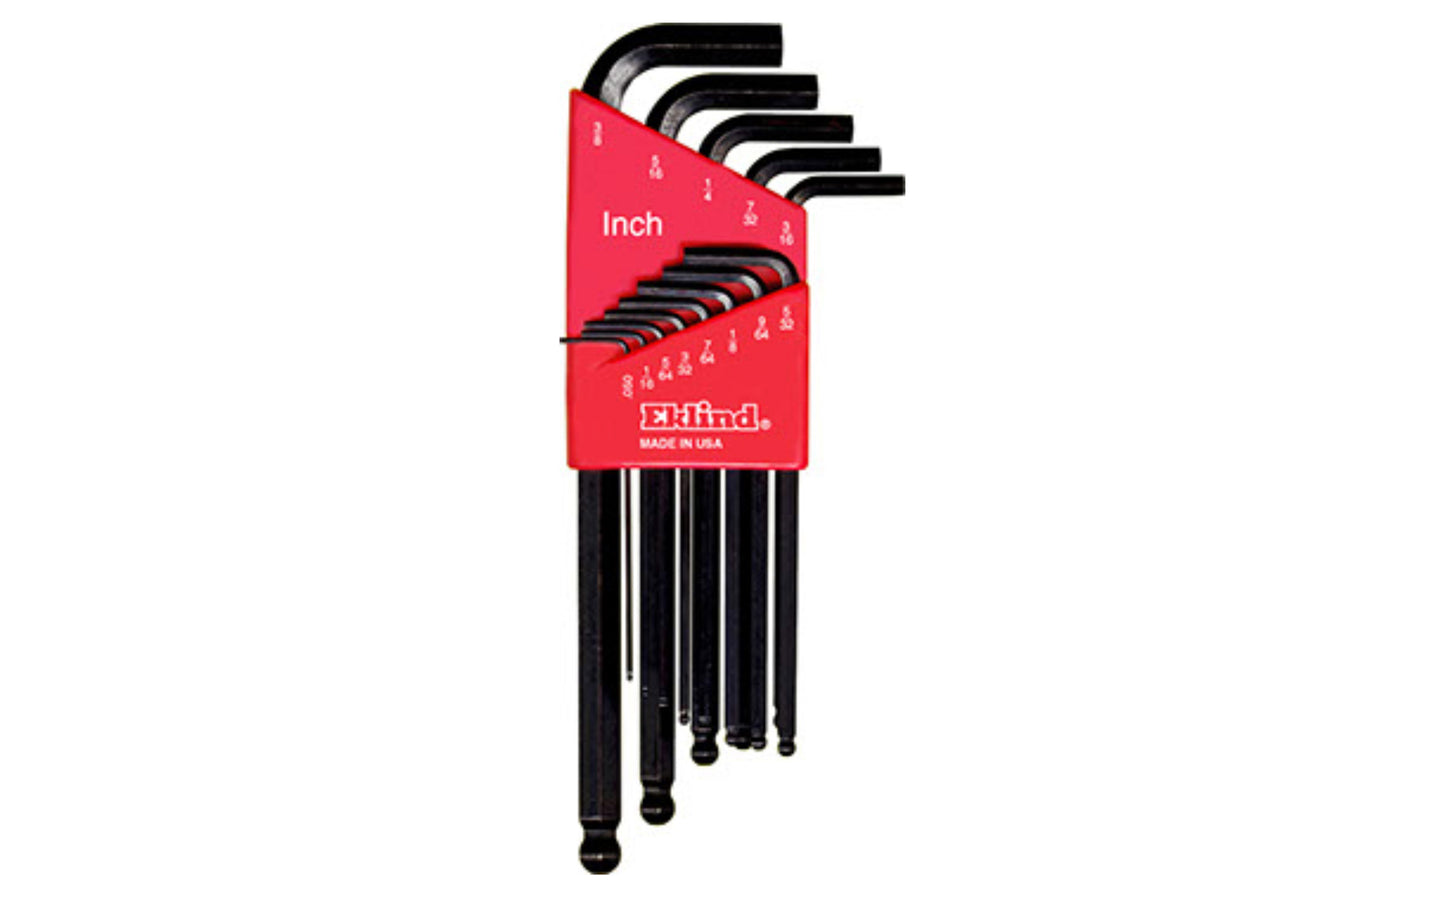 This Eklind 13-PC Ball Hex-L Wrench Key SAE Set. .050", 1/16", 5/64", 3/32", 7/64", 1/8", 9/64", 5/32", 3/16", 7/32", 1/4", 5/16", & 3/8" sizes. Allen wrench set is hardened, tempered & finished with Eklind black finish to resist rust. Plastic holder firmly retains each key. Eklind model 13213. Made in USA.